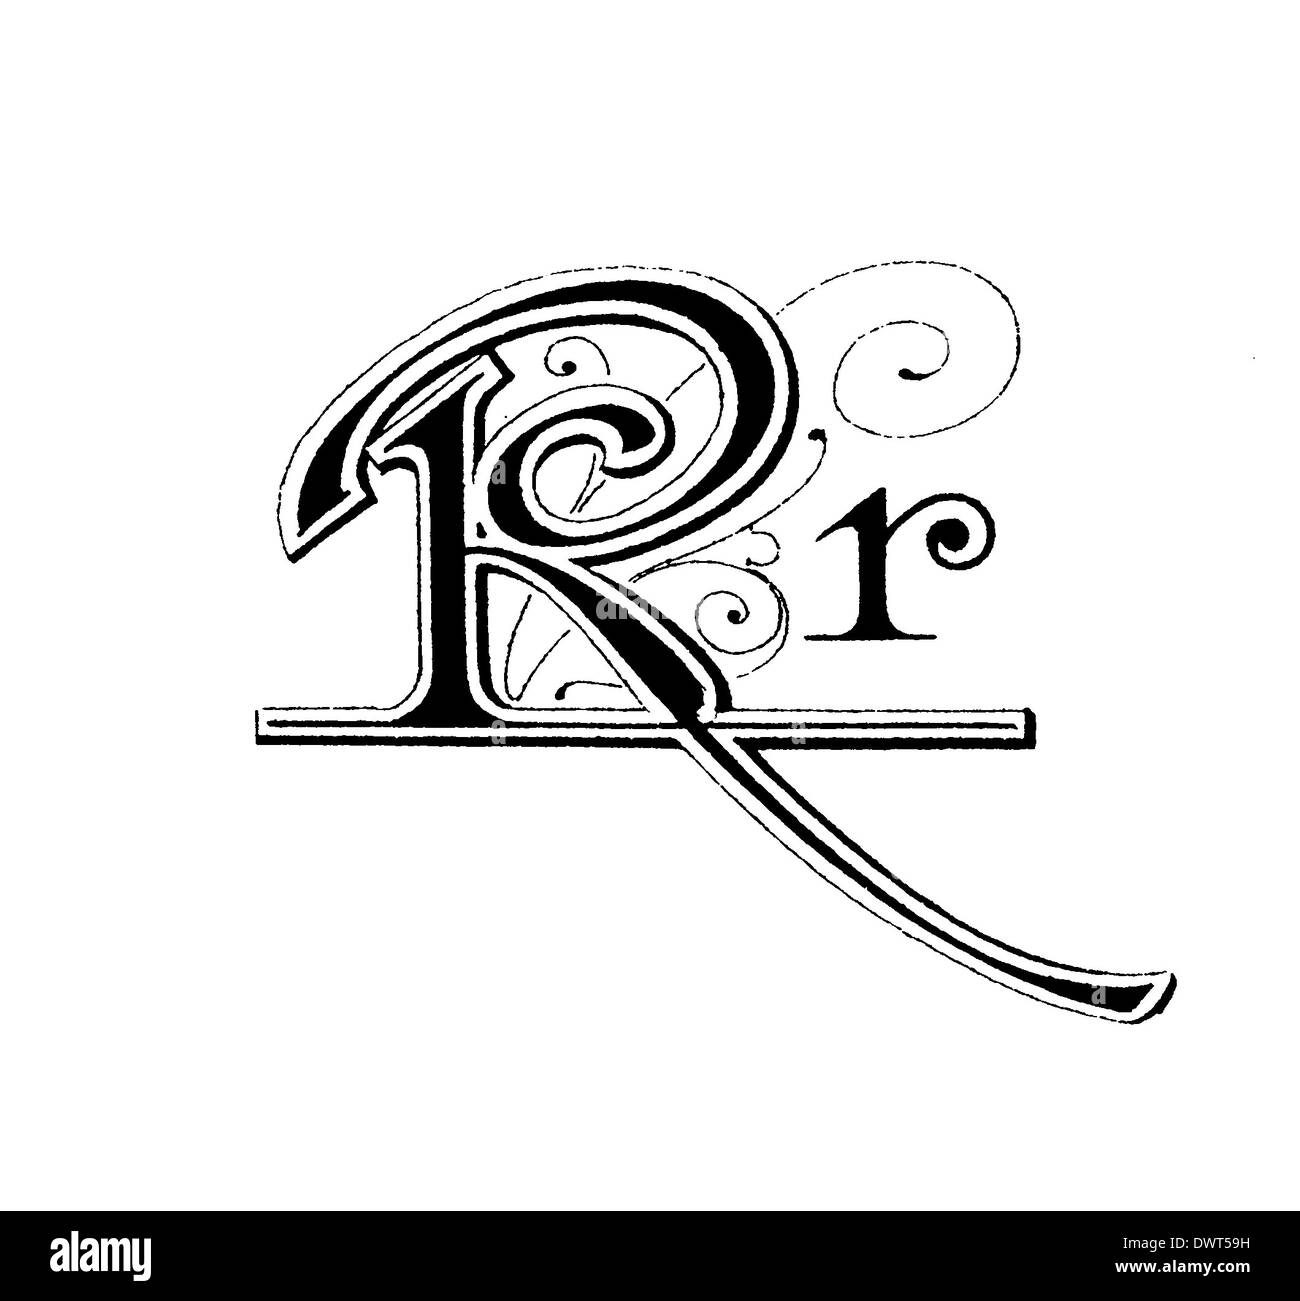 Alphabetic character, letter R Stock Photo